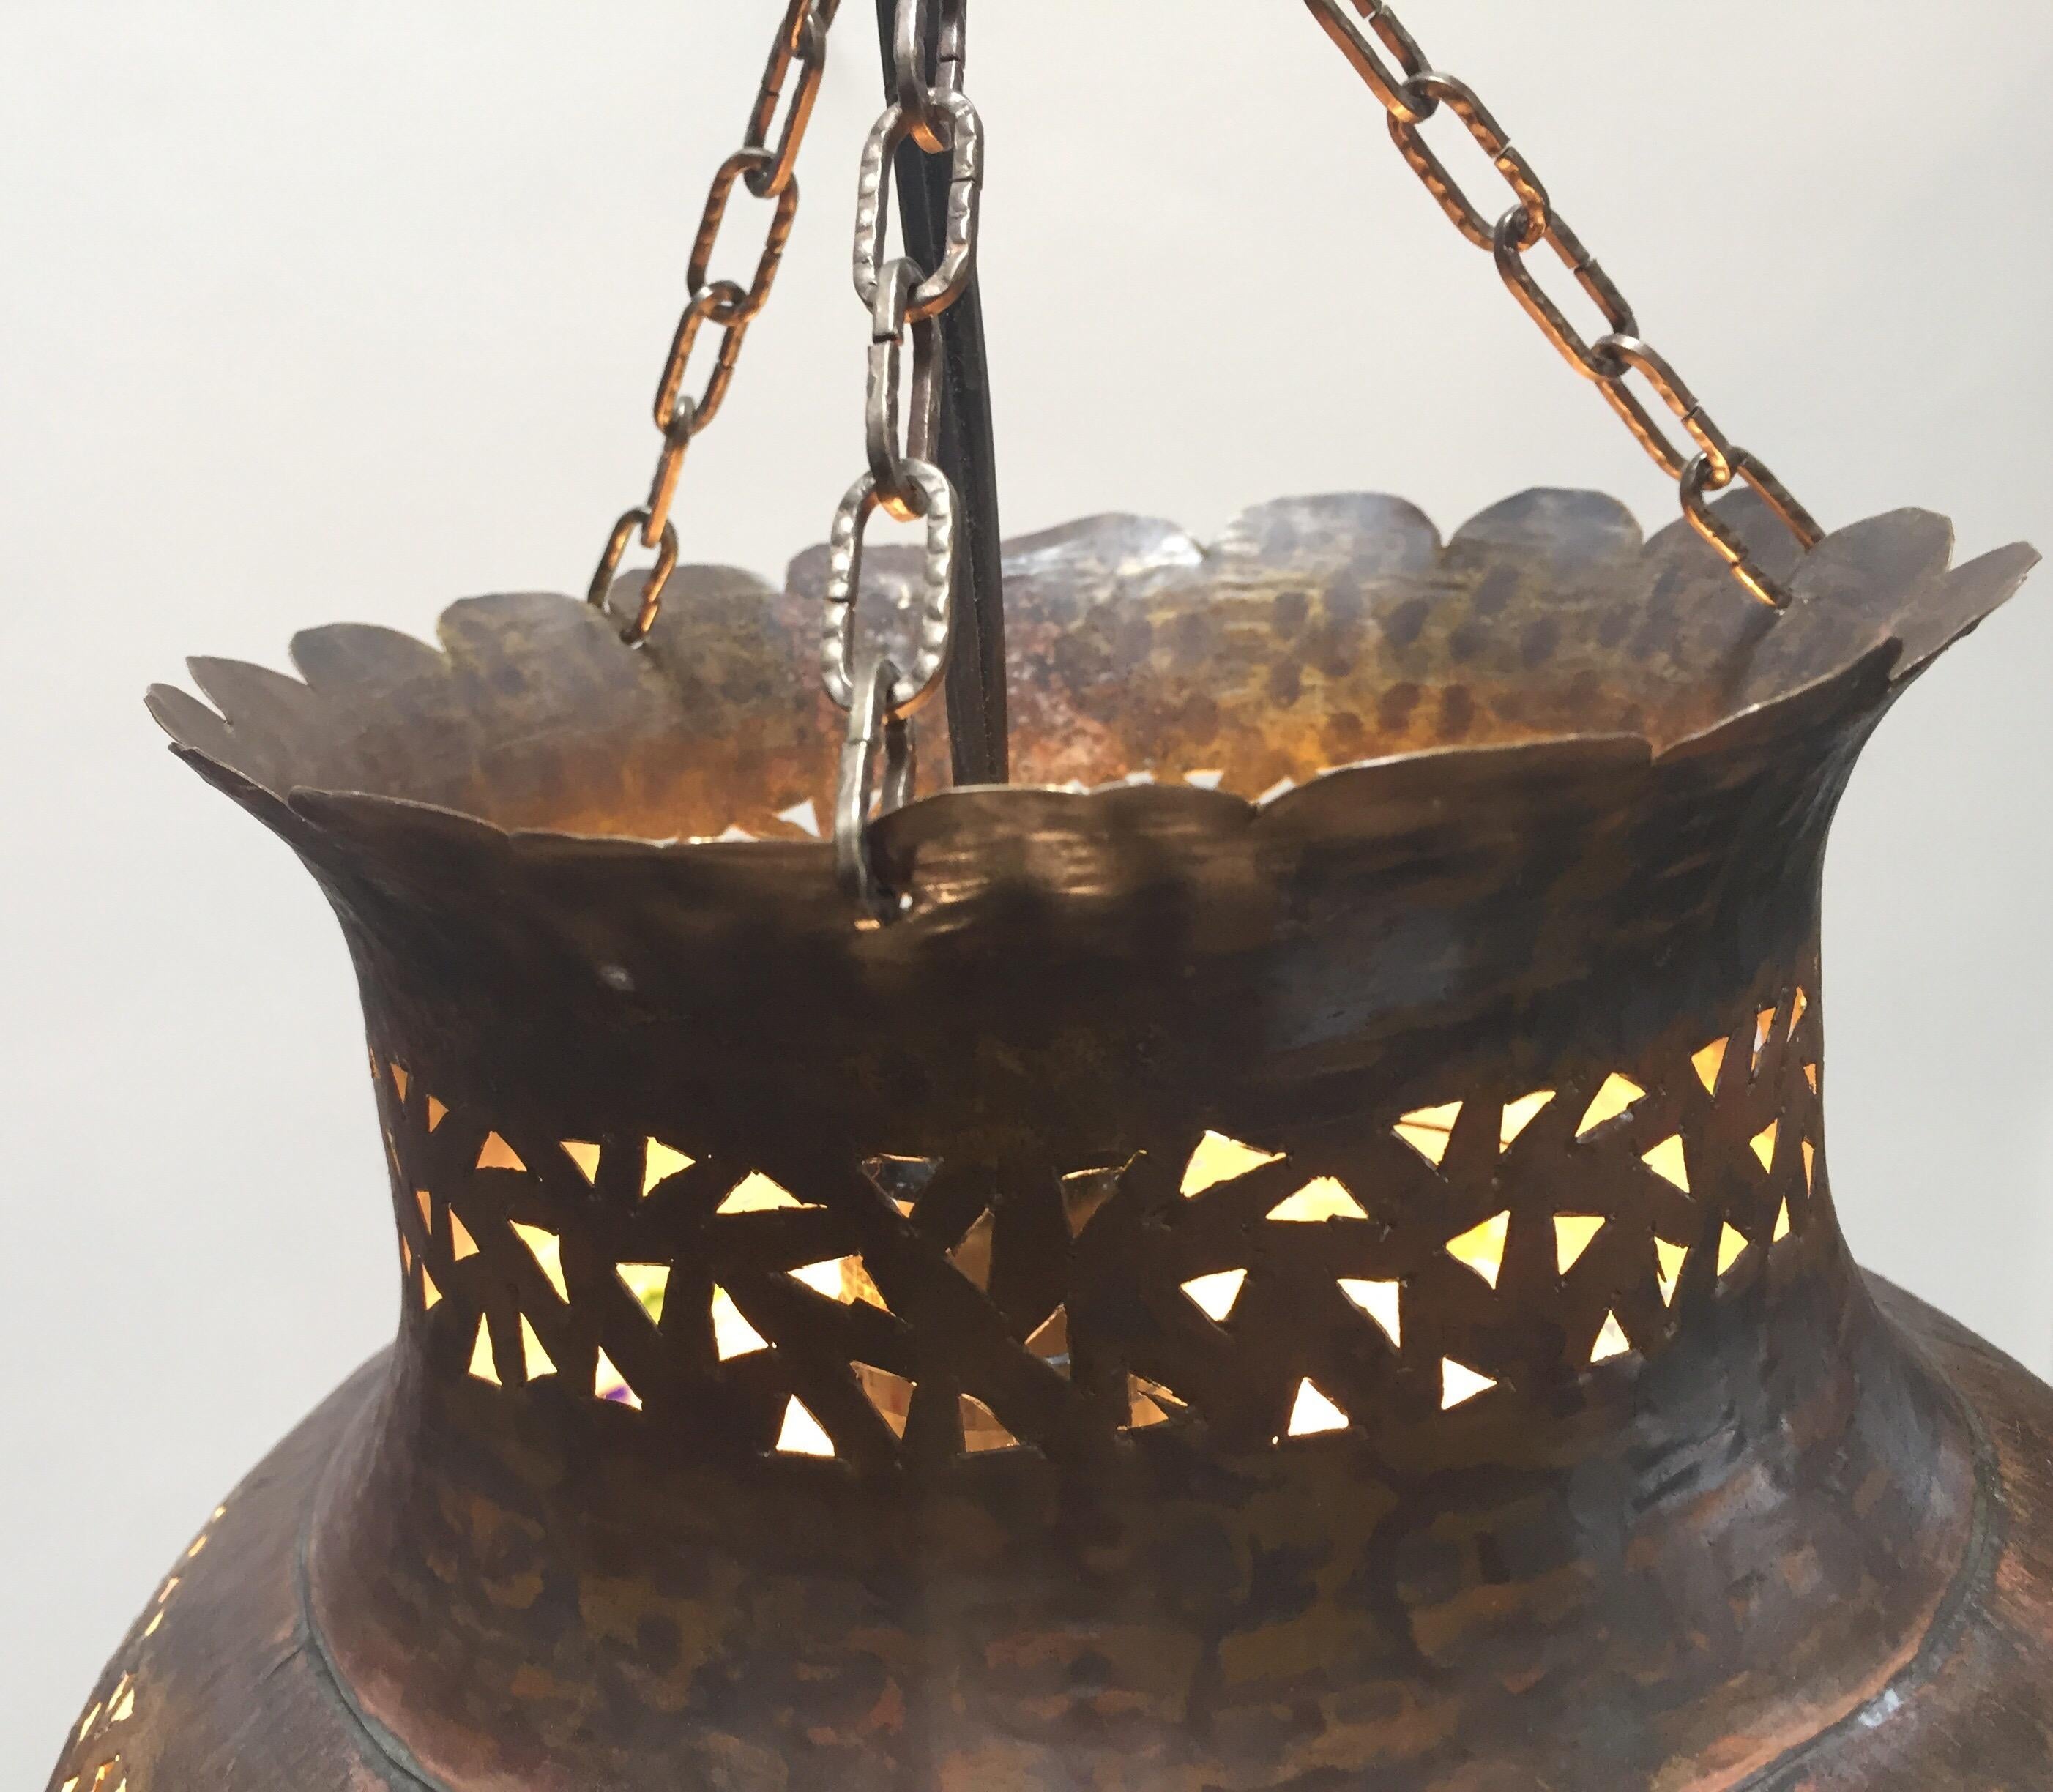 Hand-Crafted Moroccan Handcrafted Moorish Bronze Pendant Lantern with Multi-Color Glass